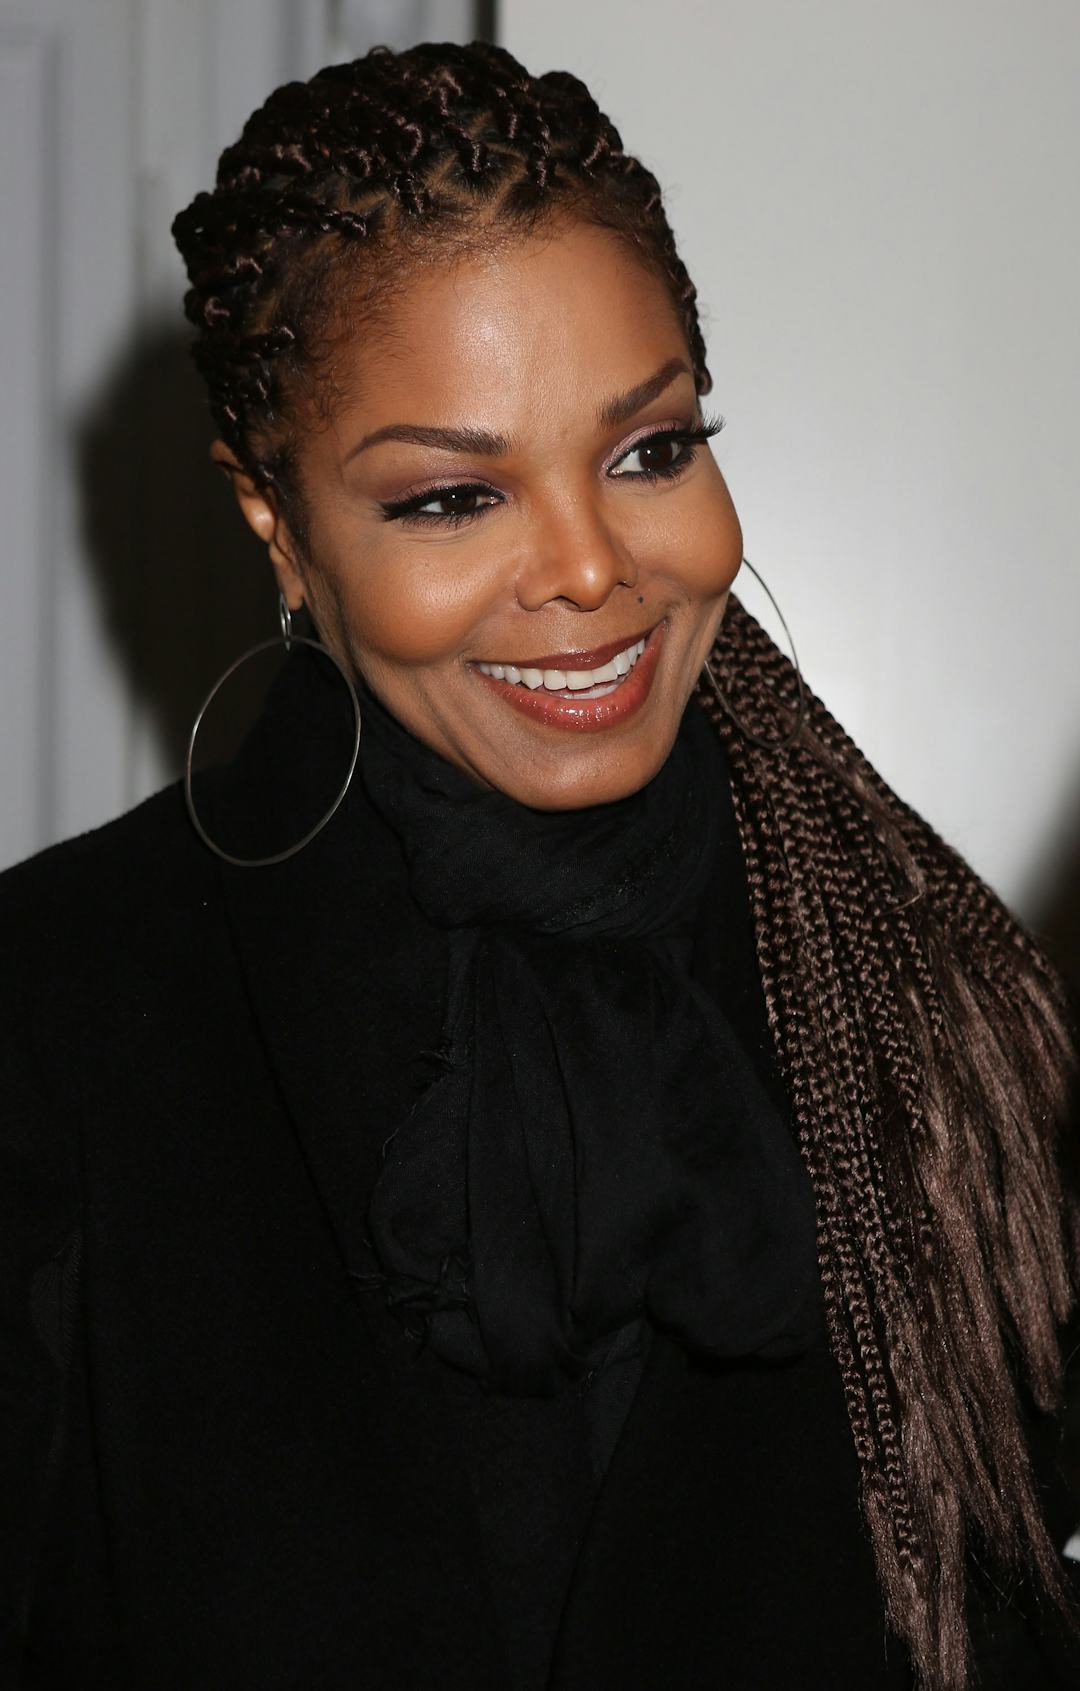 Photos Of Janet Jackson's Baby Don't Exist Yet & That's Perfectly OK